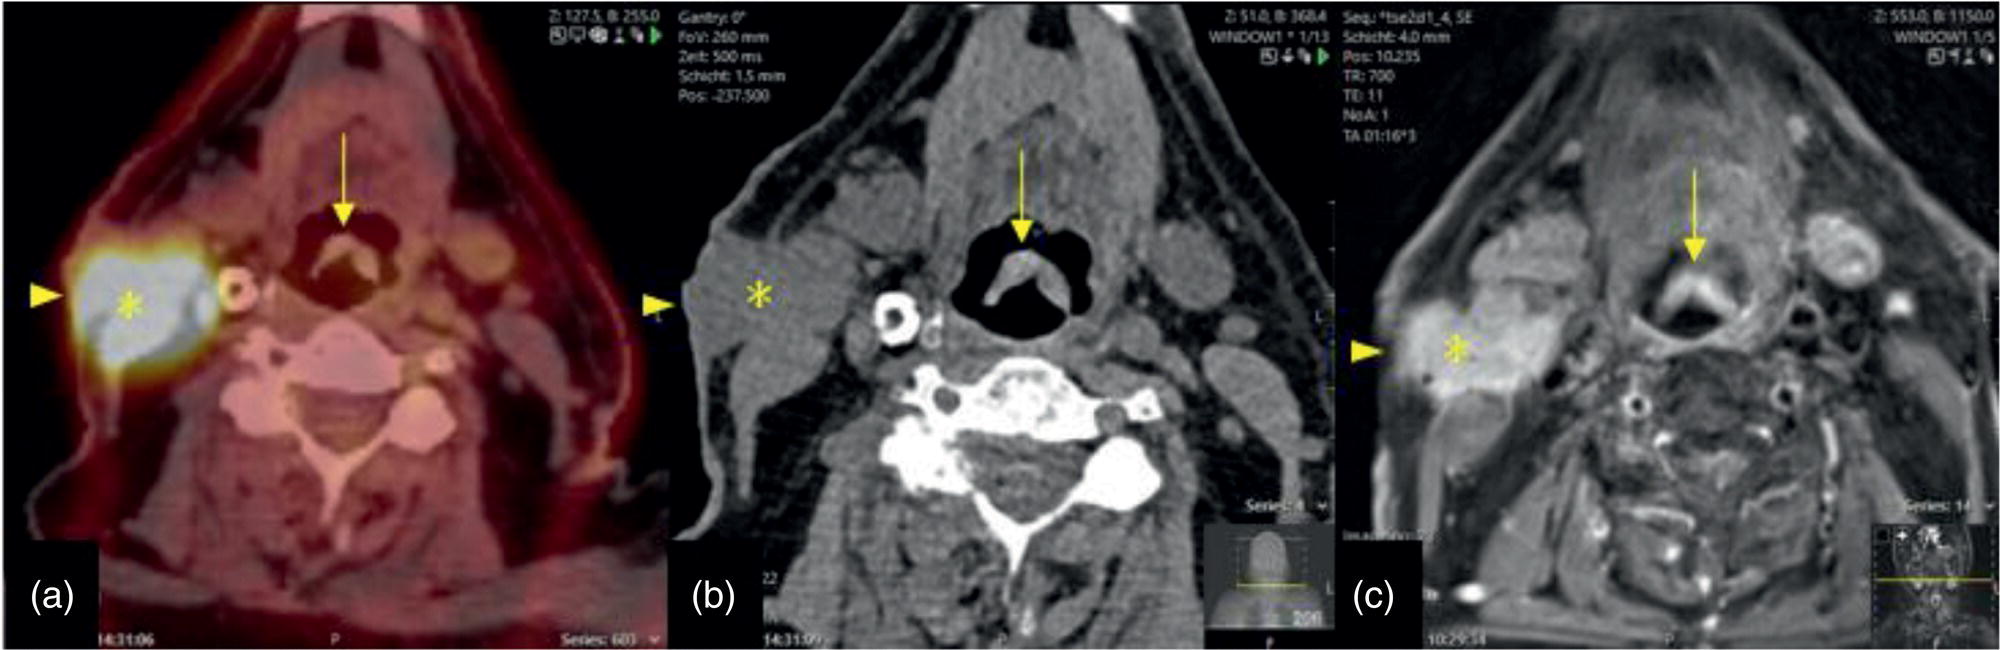 Schematic illustration of reciprocal compensation of artifacts and complementary information by PET-CT and MRI in a patient with recurrent tumor and lymph node metastases.